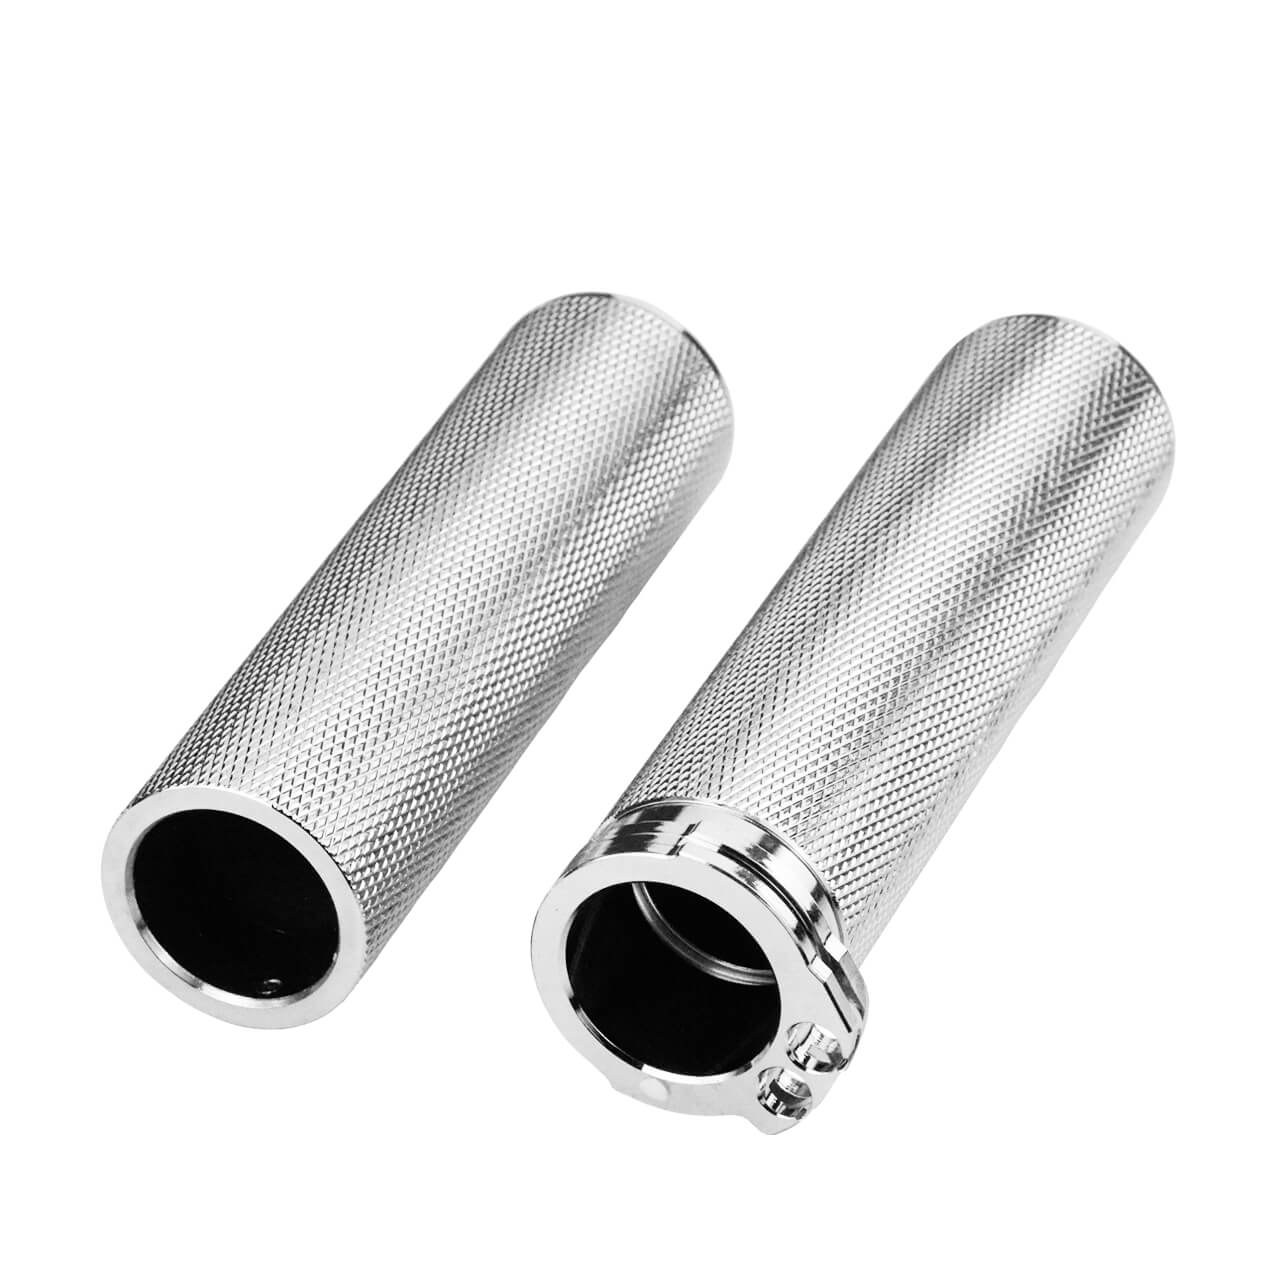 Mactions_CNC_chrome_handle_grips_for_harley_sportster_GP003302